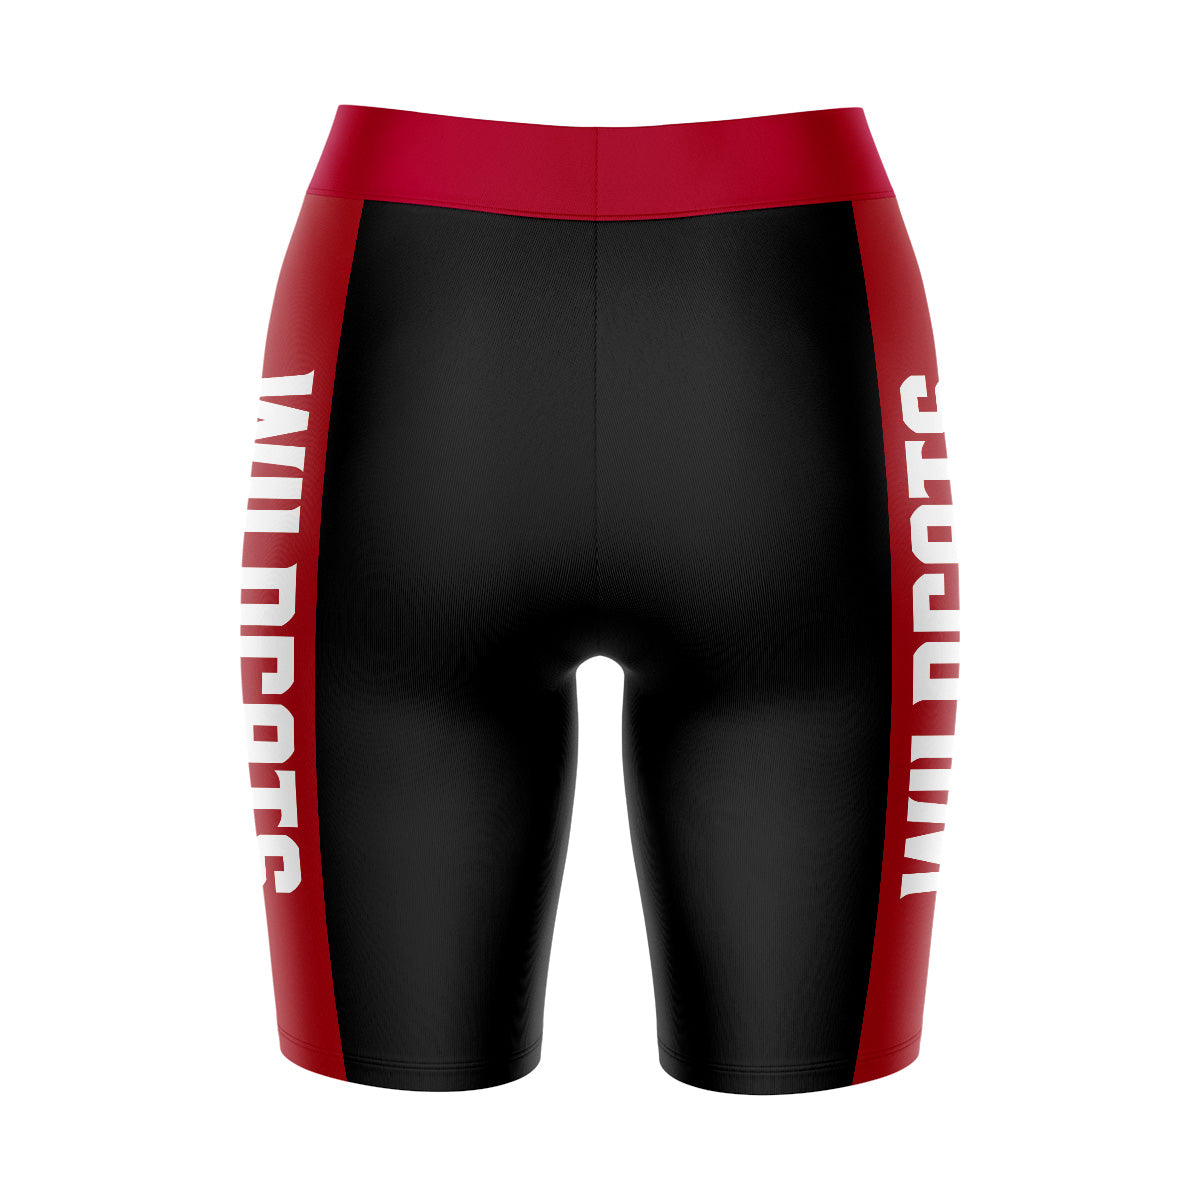 CWU Wildcats Vive La Fete Game Day Logo on Waistband and Red Stripes Black Women Bike Short 9 Inseam"